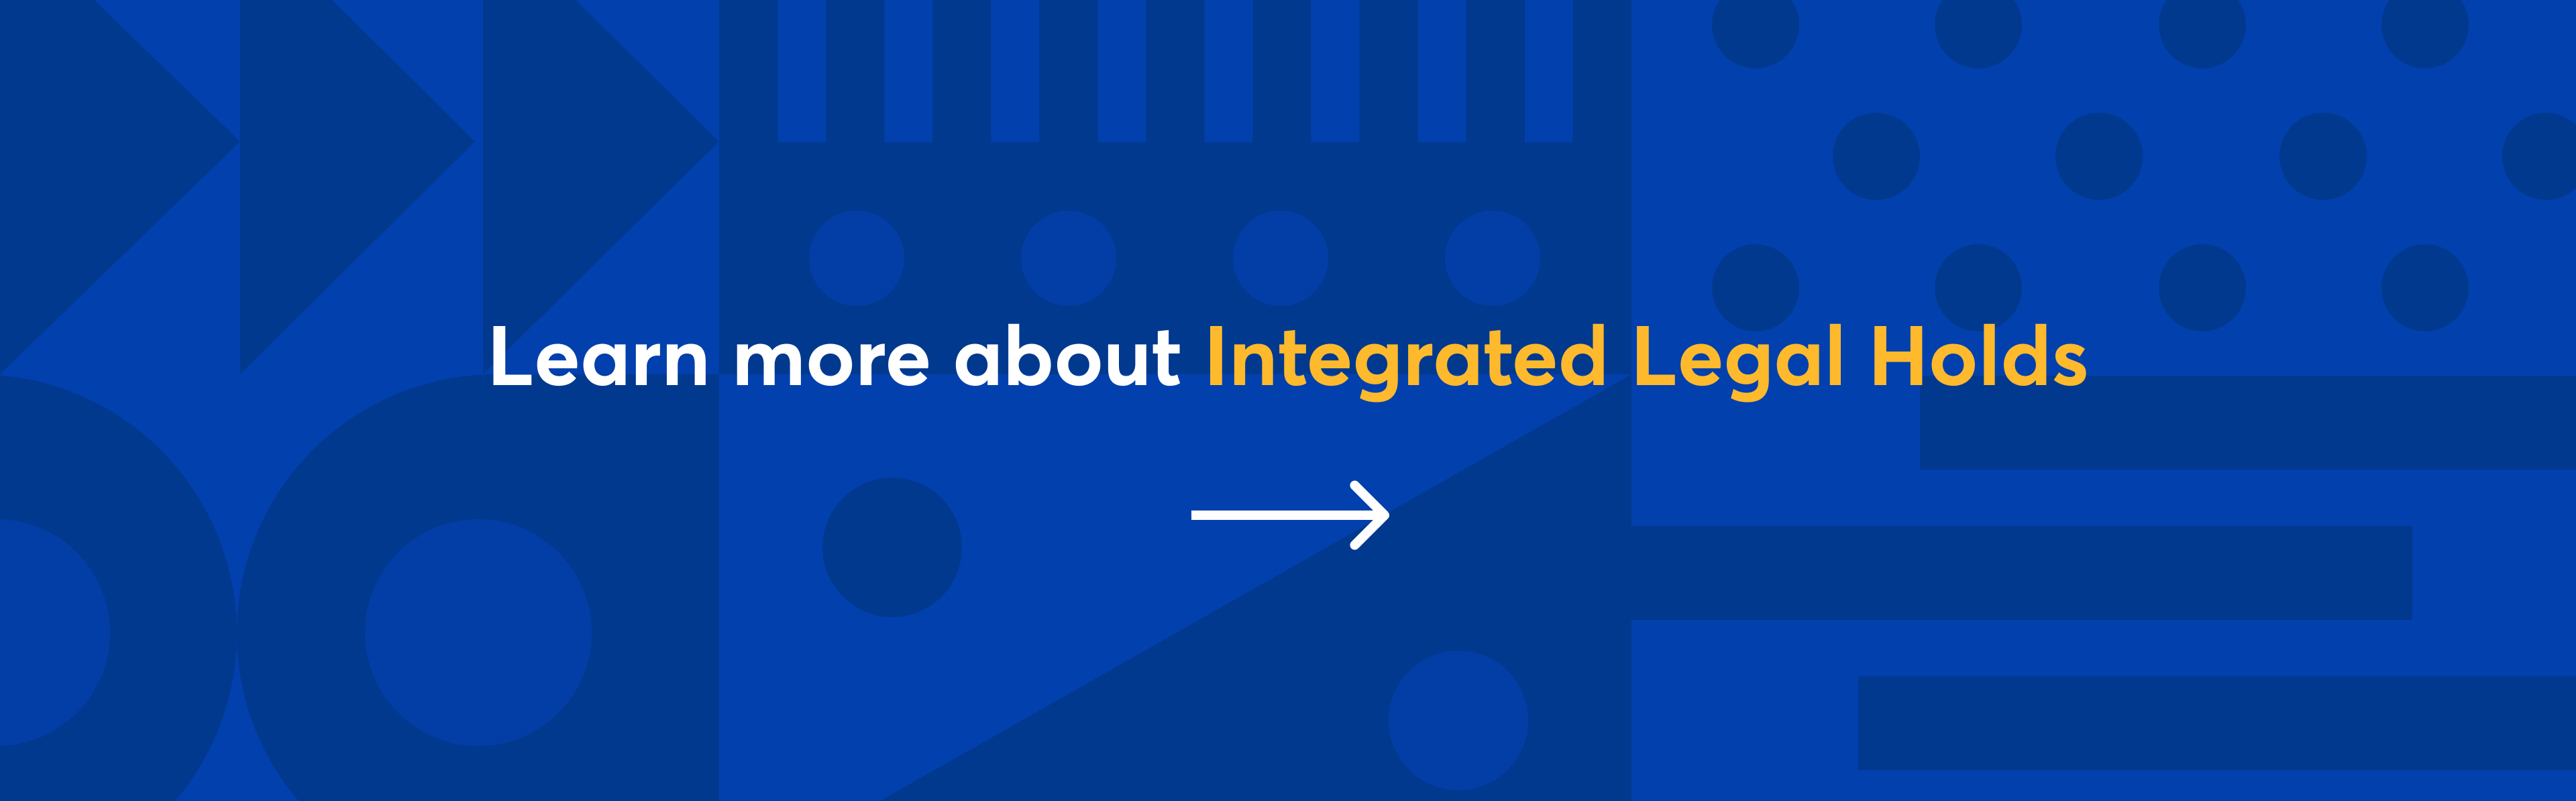 Learn more about Integrated Legal Holds.